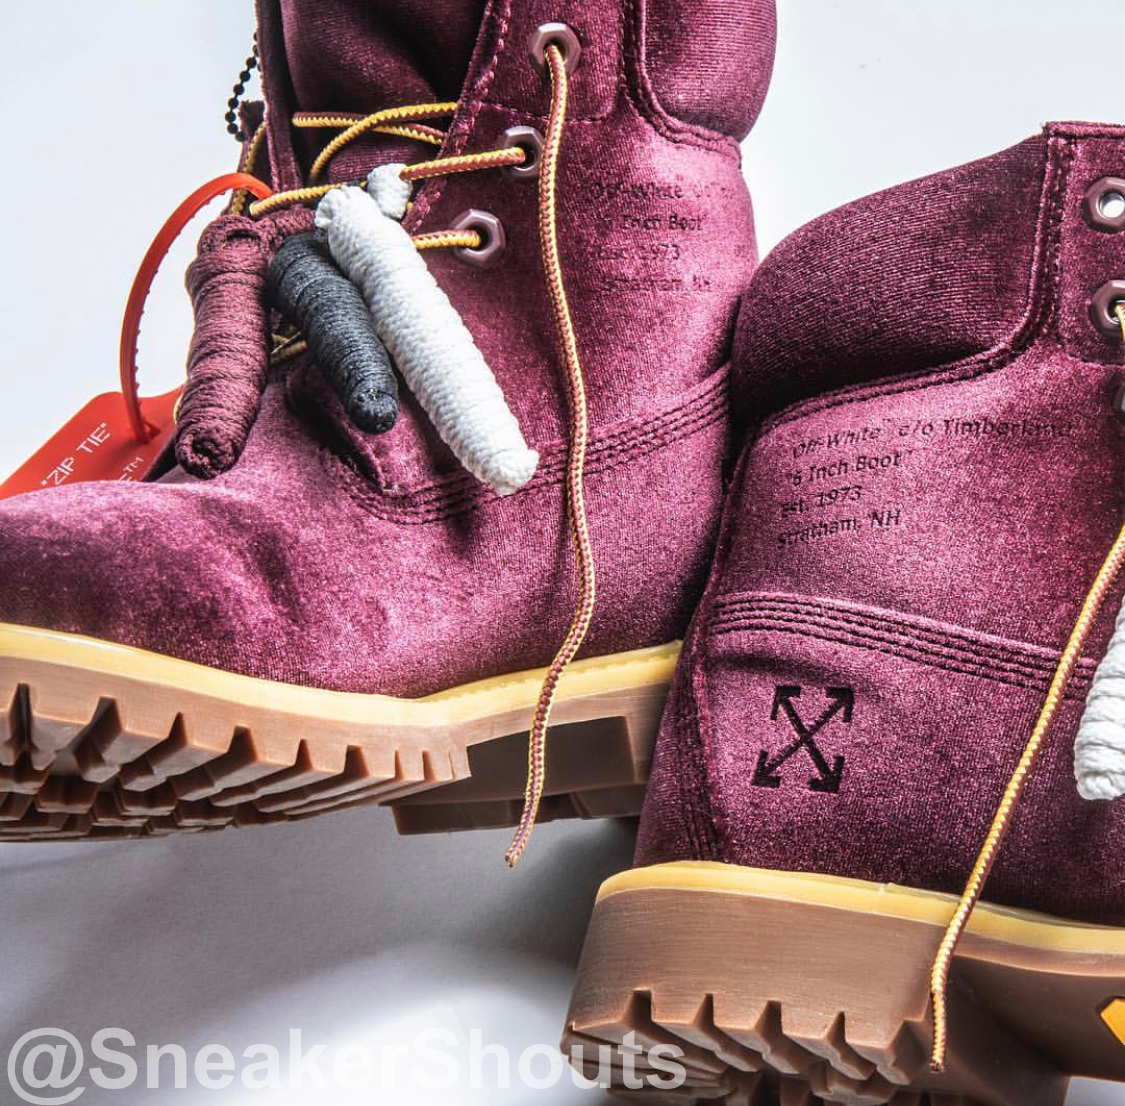 Now Available: Off White x Timberland 6-inch Velvet "Bordeaux" — Shouts